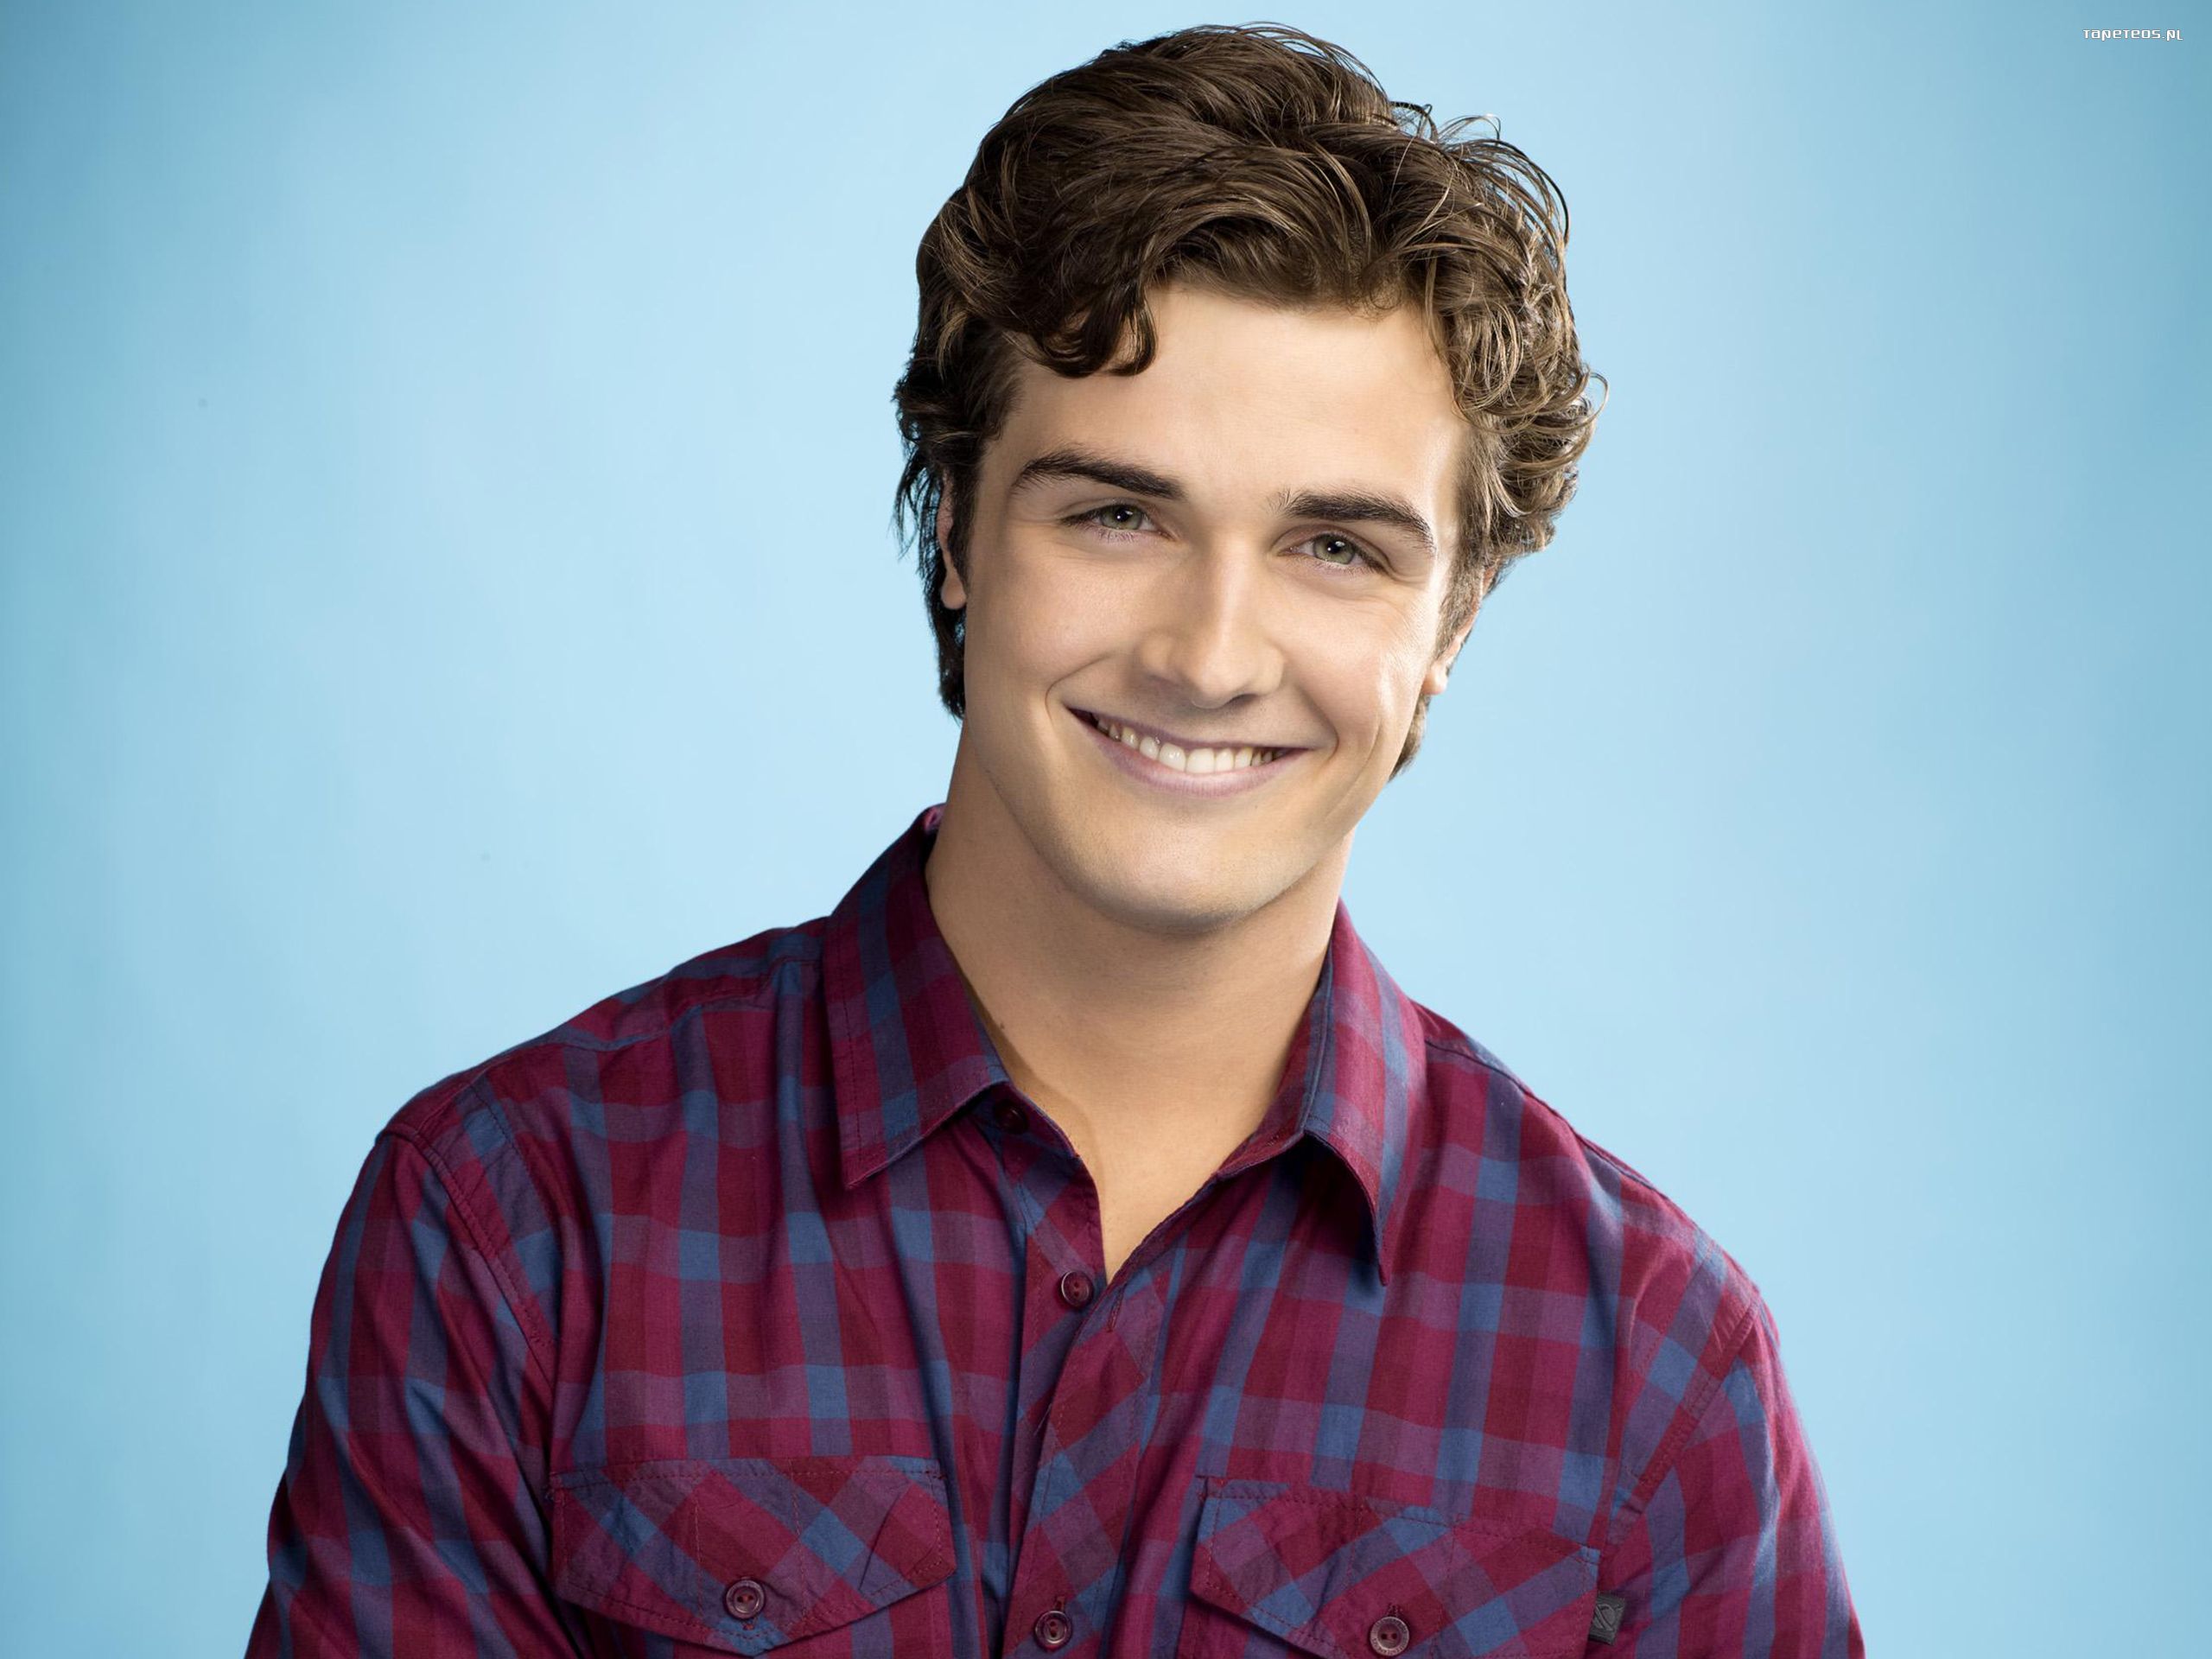 How old was Matty in awkward?